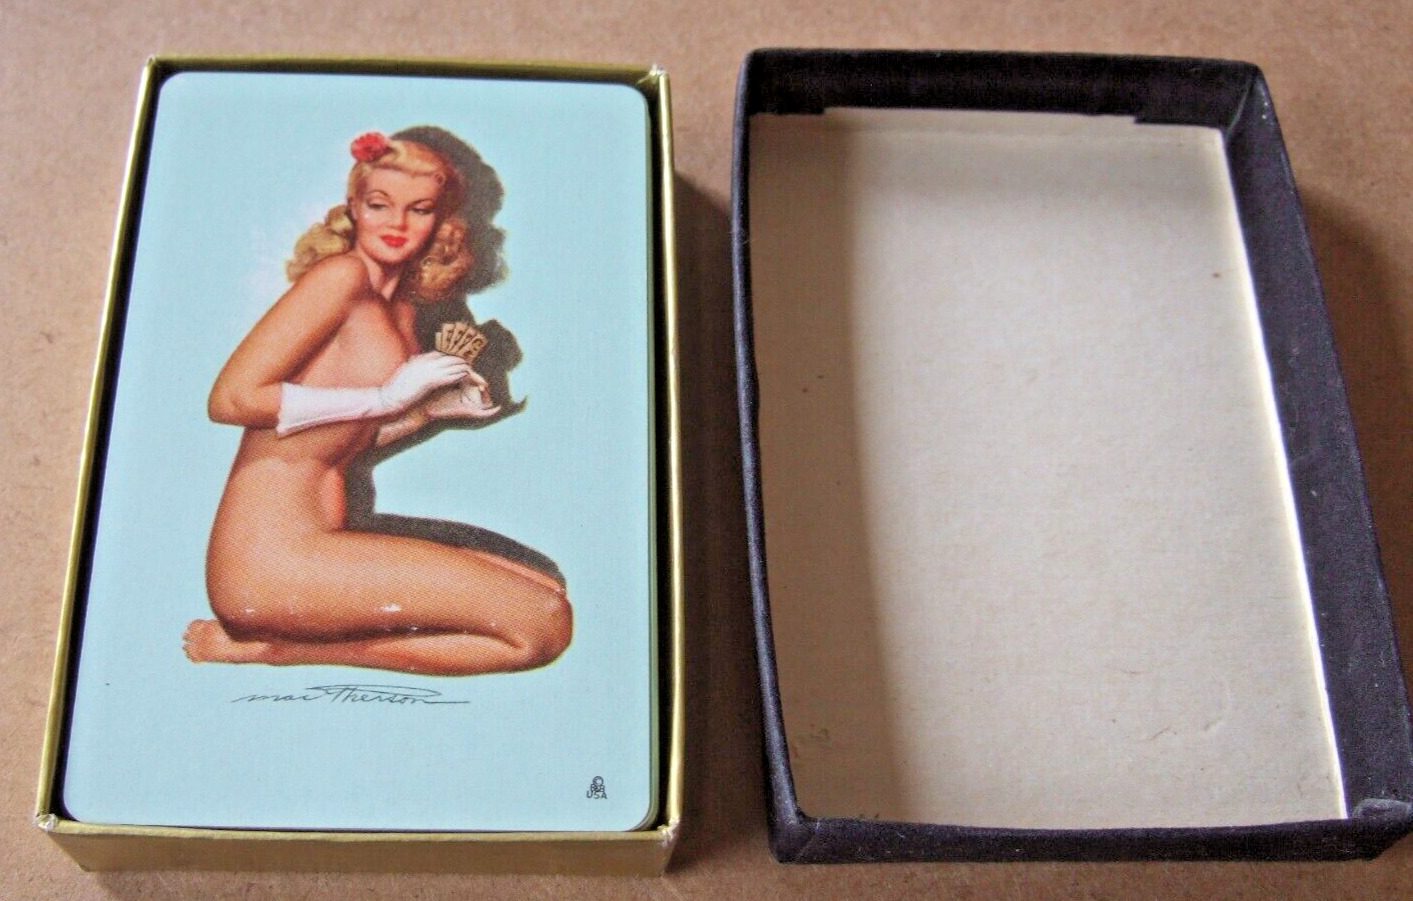 VINTAGE 1940s ORIGINAL MAC THERSON PIN-UP PLAYING CARDS  52 CARDS & 1 JOKER +